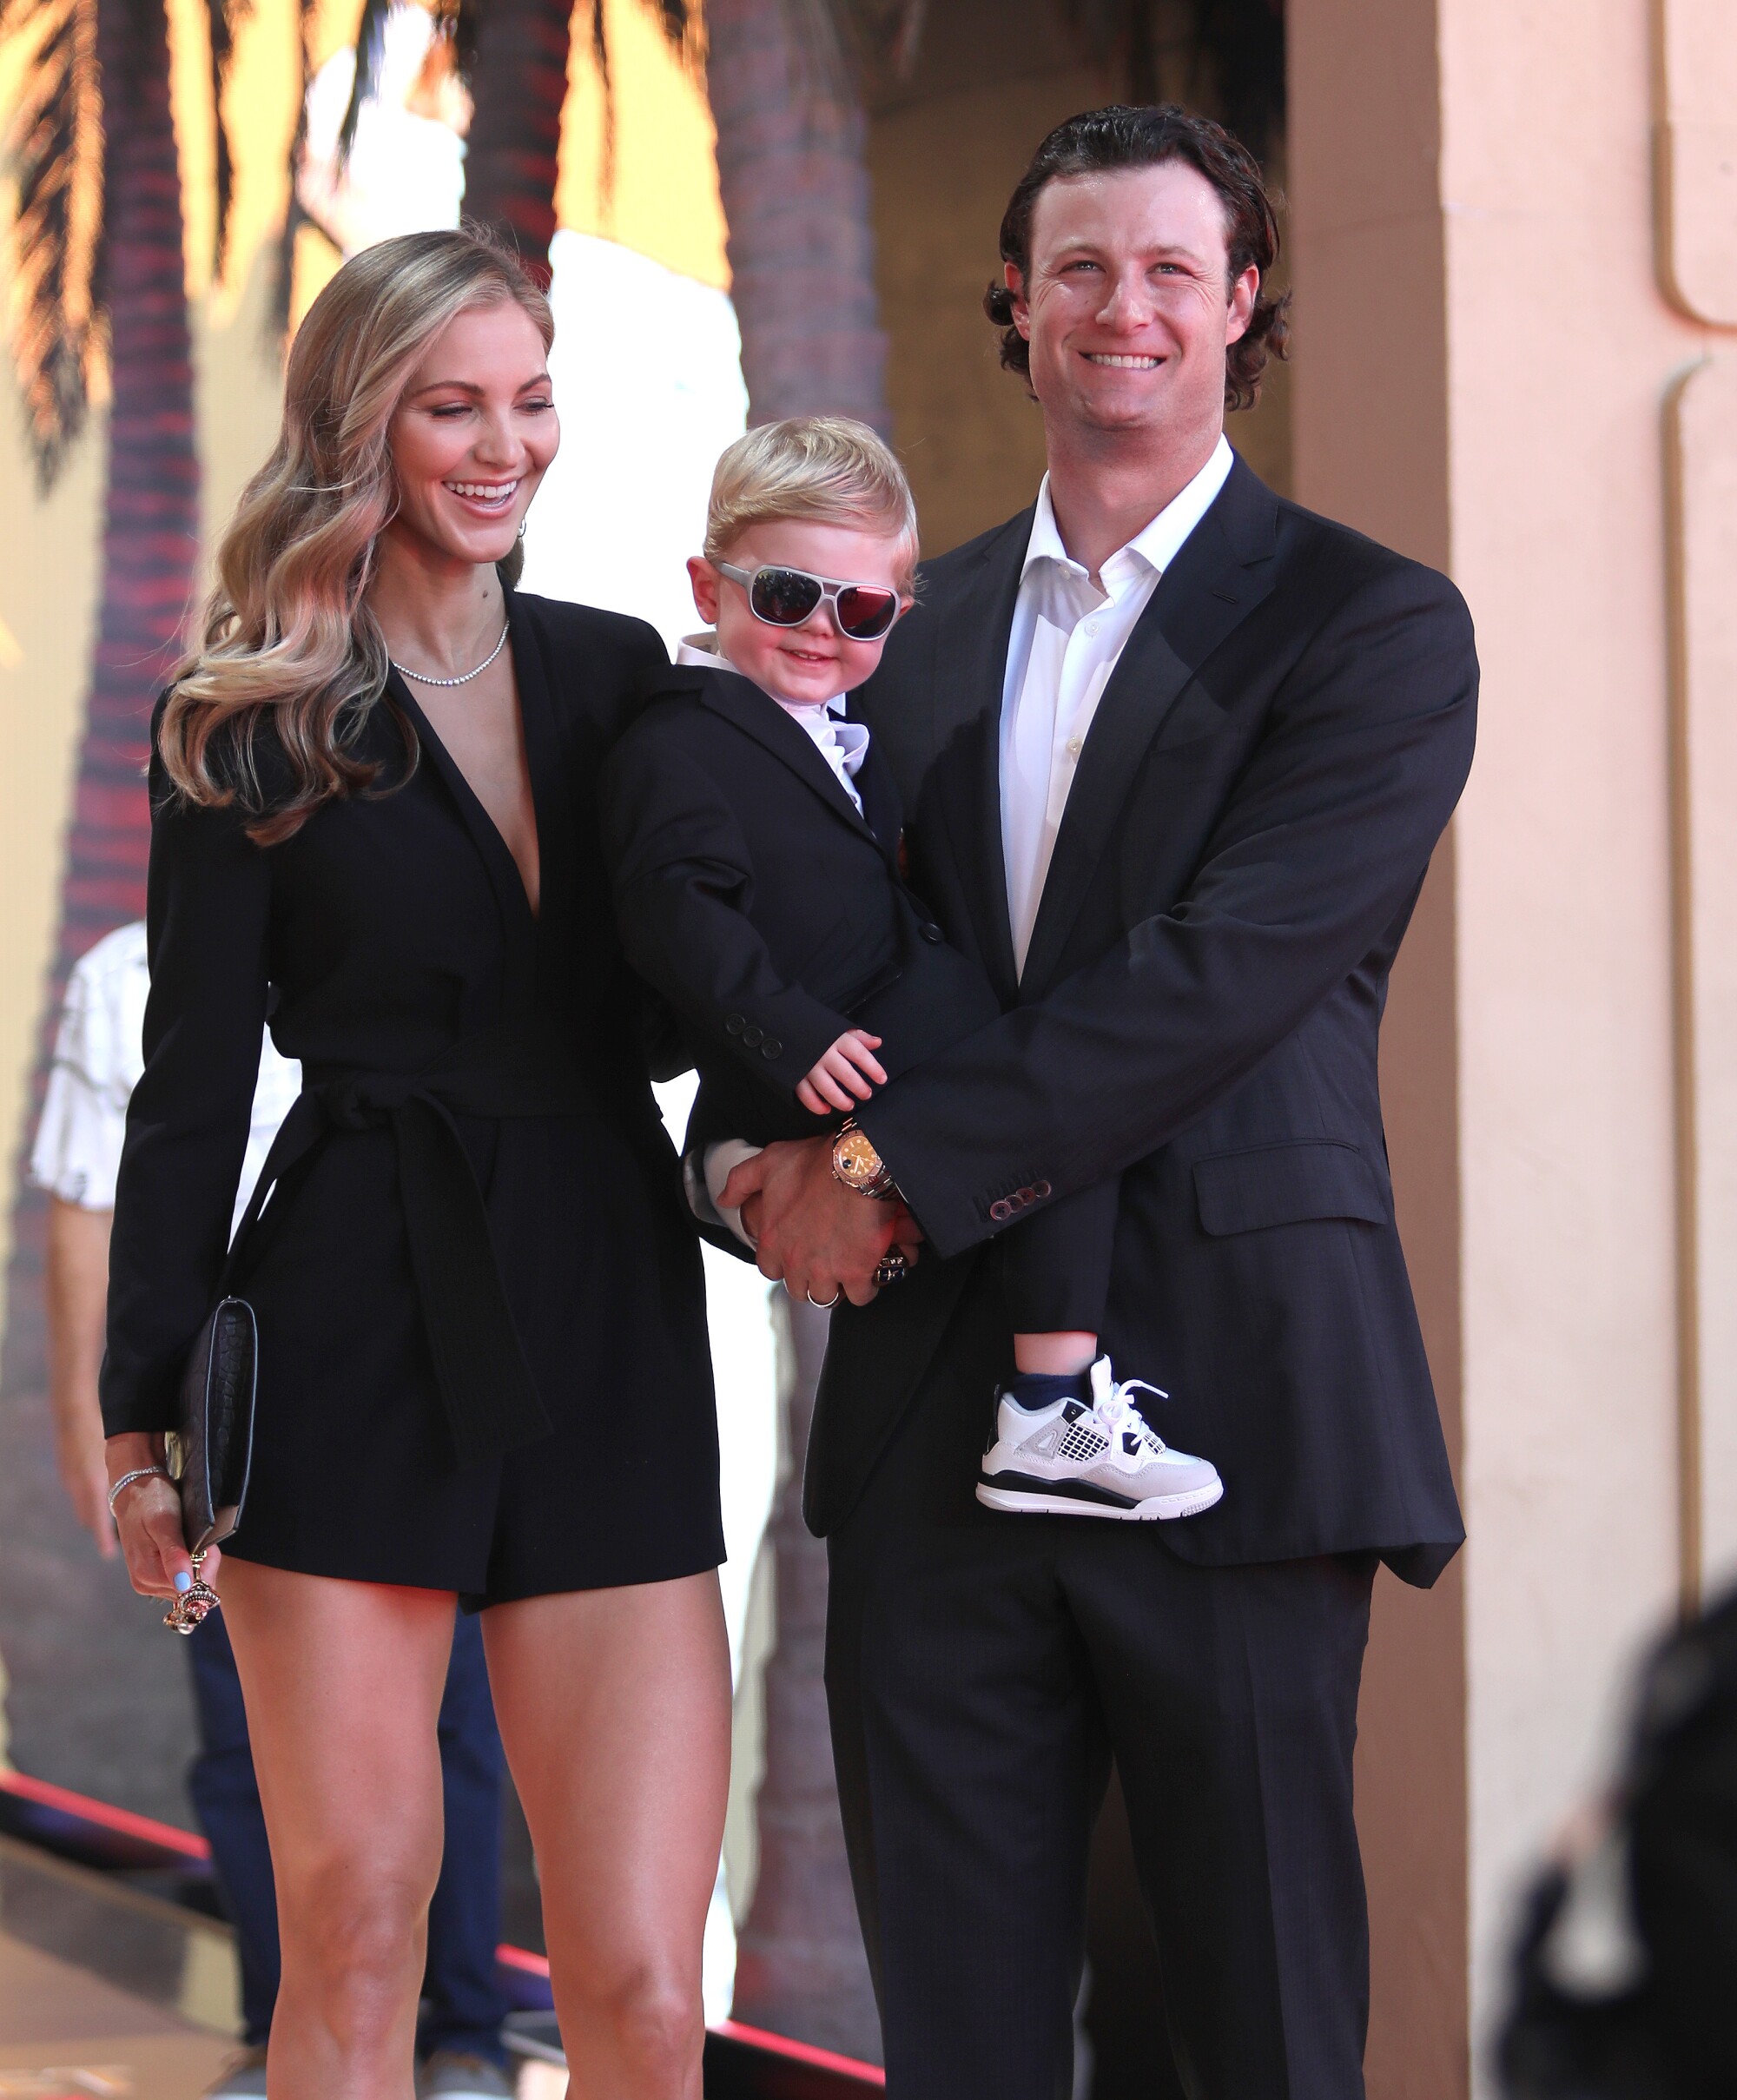 New York Yankees pitcher Gerrit Cole arrives with his family on the red carpet for the 2022 MLB All-Star Game.